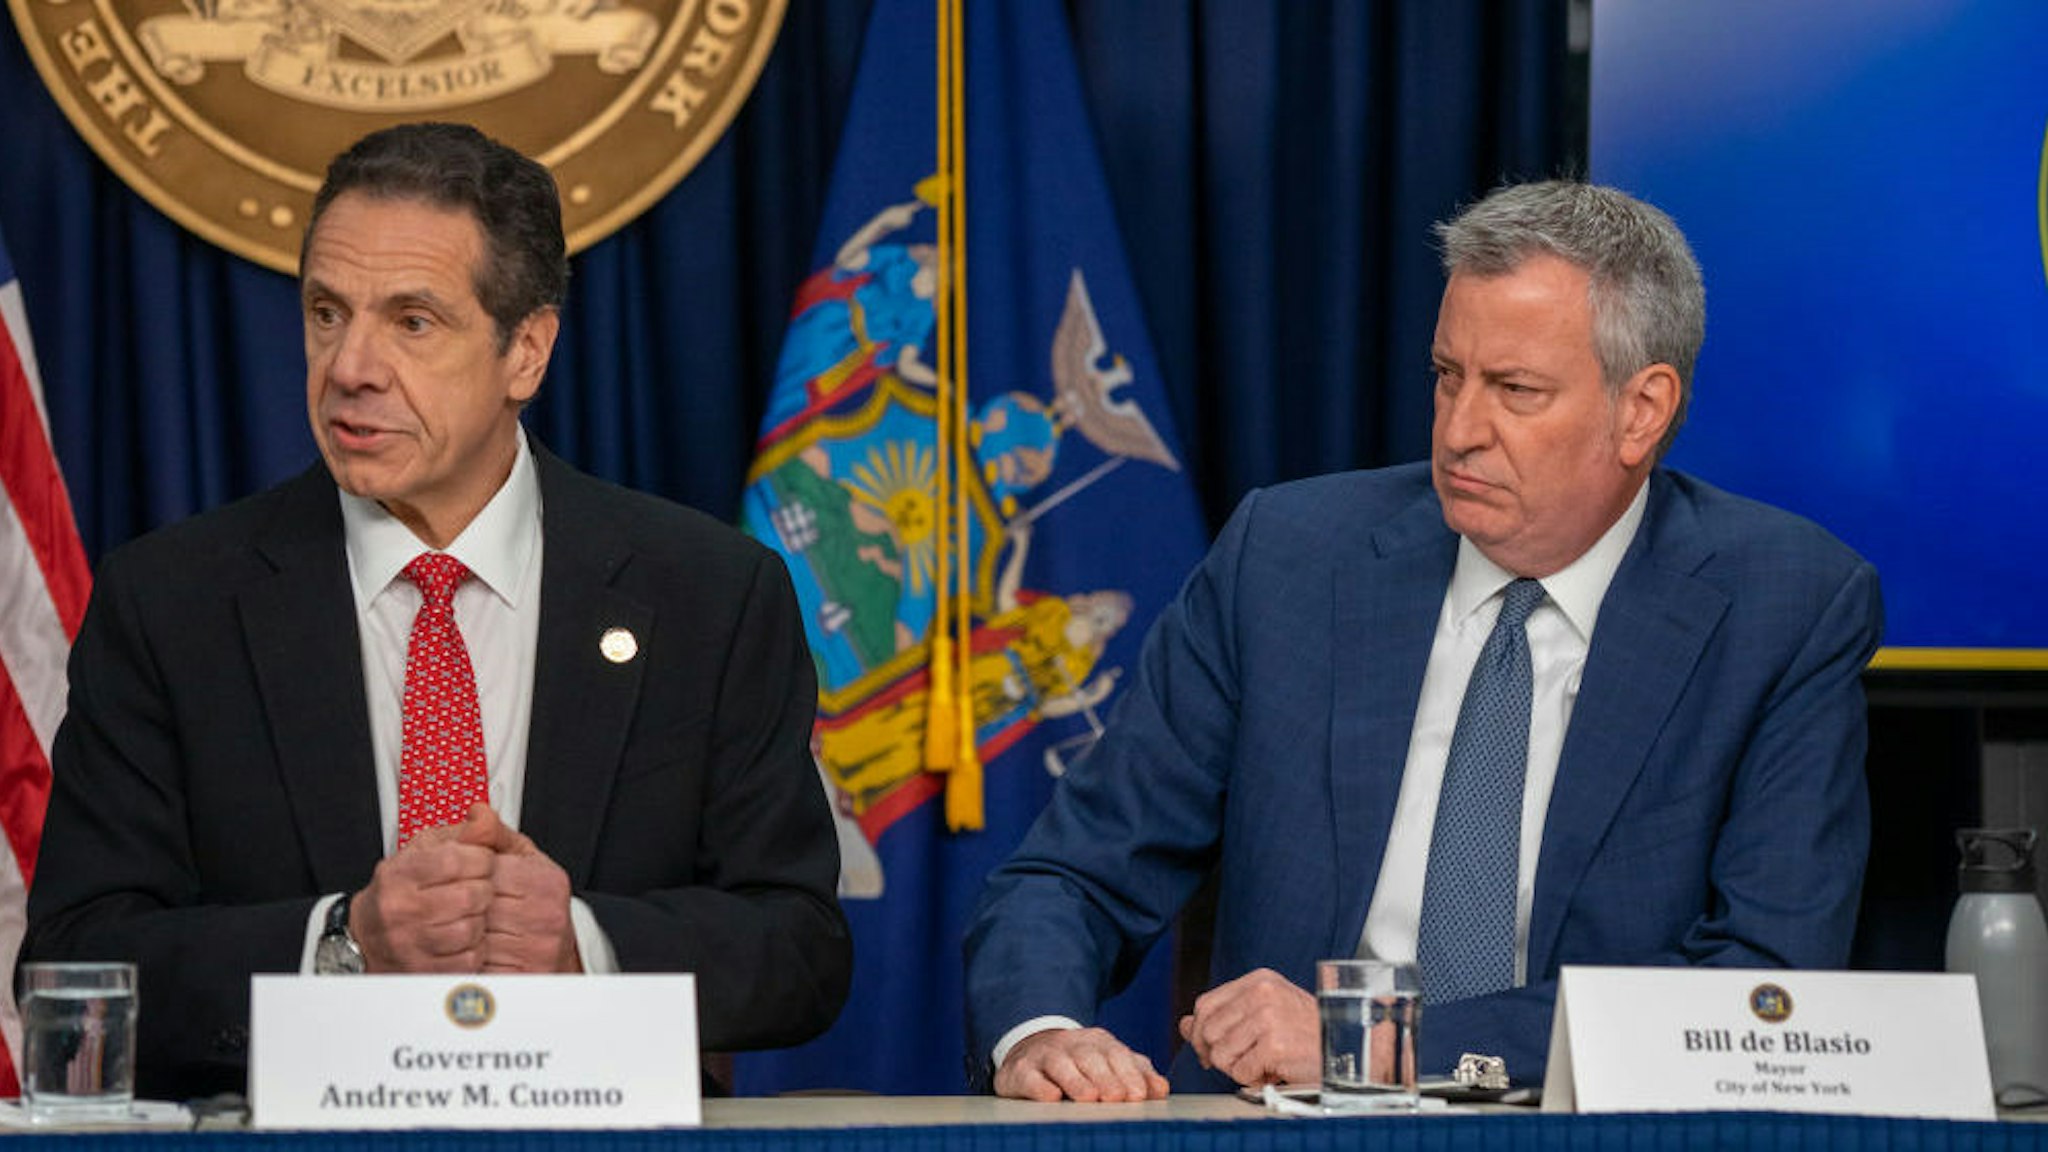 New York state Gov. Andrew Cuomo and New York City Mayor Bill DeBlasio speak during a news conference on the first confirmed case of COVID-19 in New York on March 2, 2020 in New York City. A female health worker in her 30s who had traveled in Iran contracted the virus and is now isolated at home with symptoms of COVID-19, but is not in serious condition. Cuomo said in a statement that the patient "has been in a controlled situation since arriving to New York." (Photo by David Dee Delgado/Getty Images)